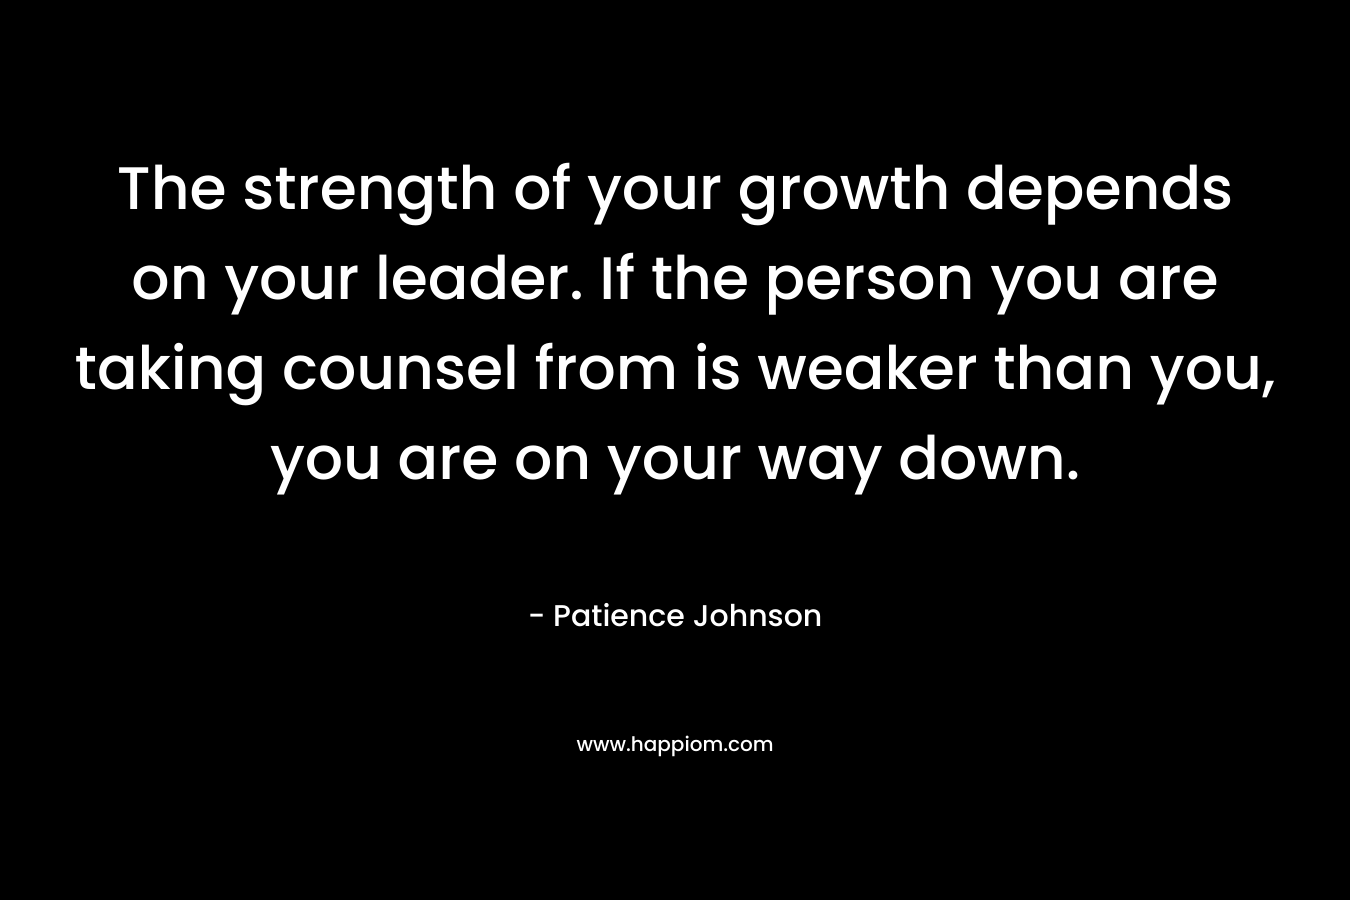 The strength of your growth depends on your leader. If the person you are taking counsel from is weaker than you, you are on your way down. – Patience Johnson